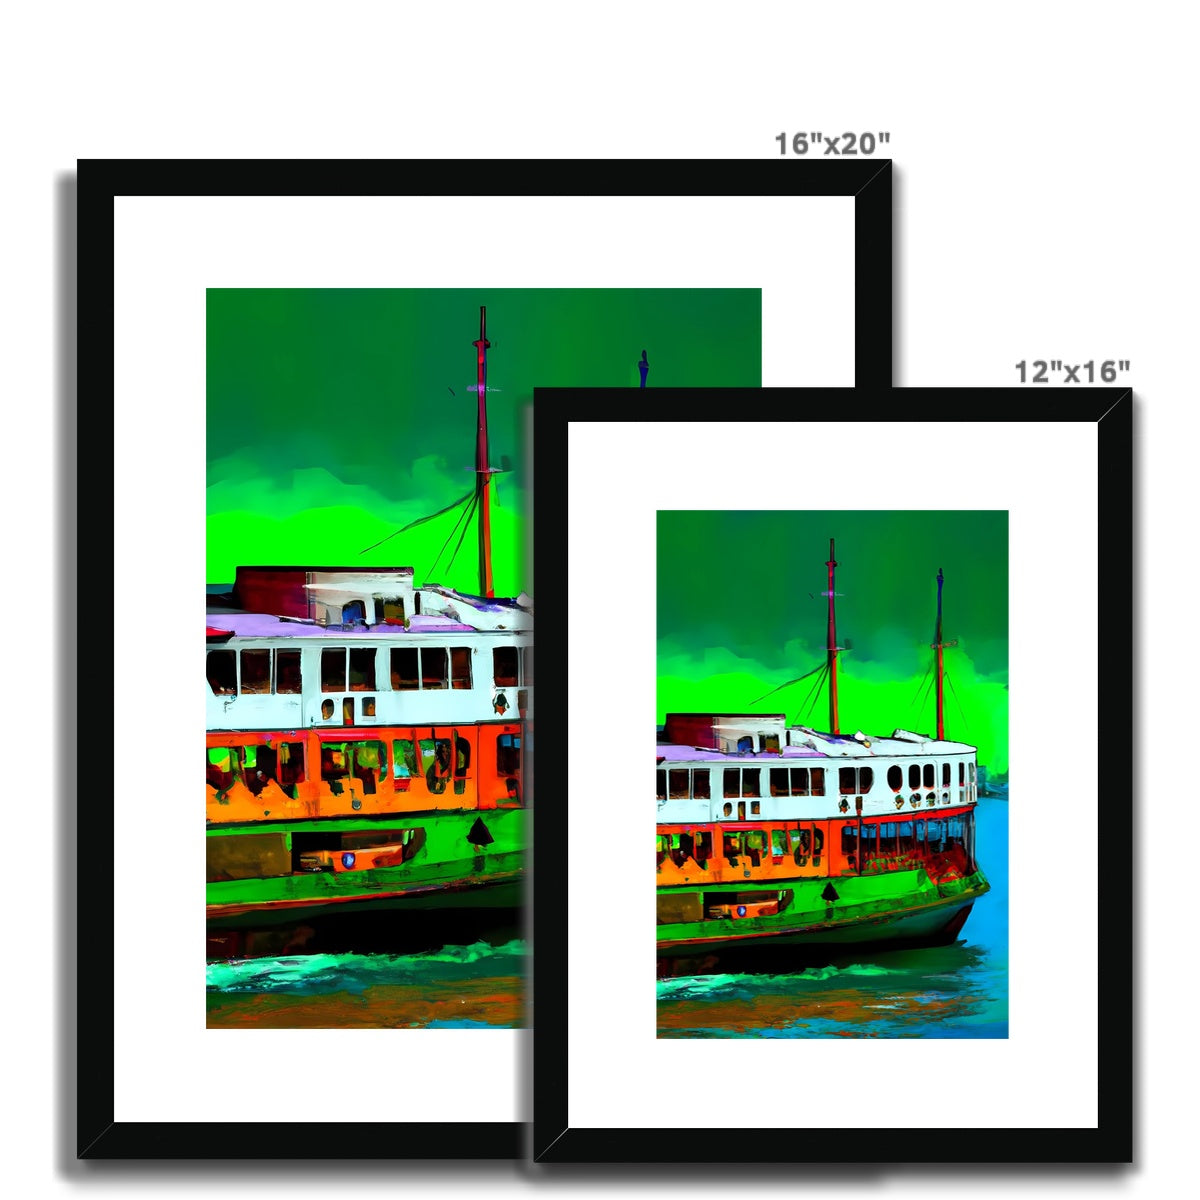 Hong Kong Impressions - Star Ferry Framed & Mounted Print